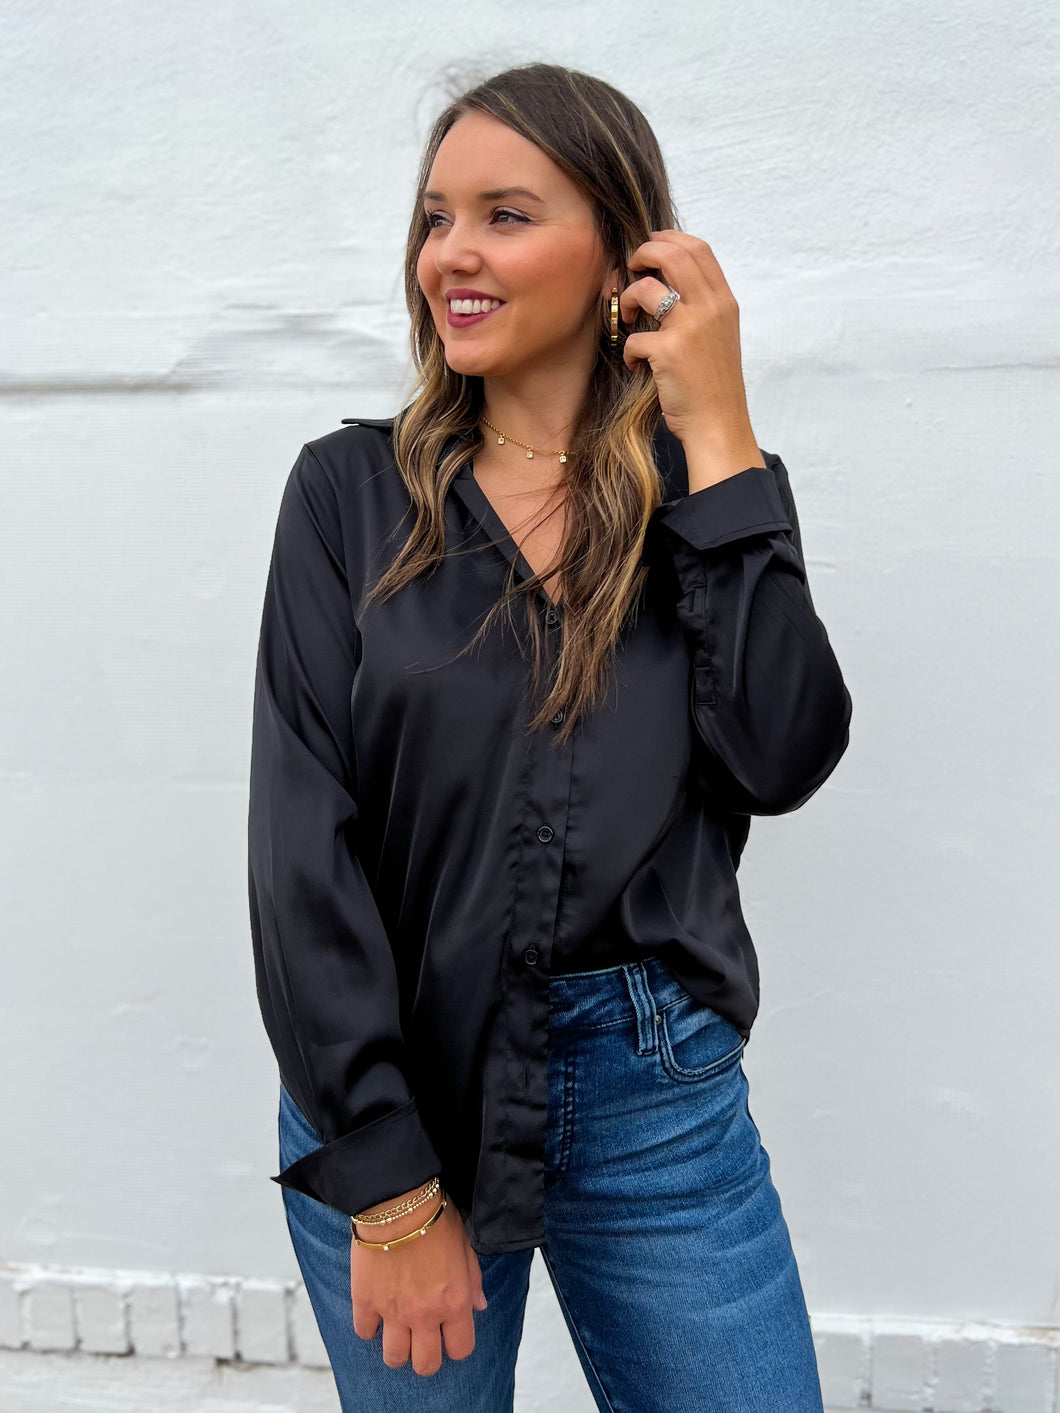 Glam: V-Neck Button Down Shirt in Black GT6115